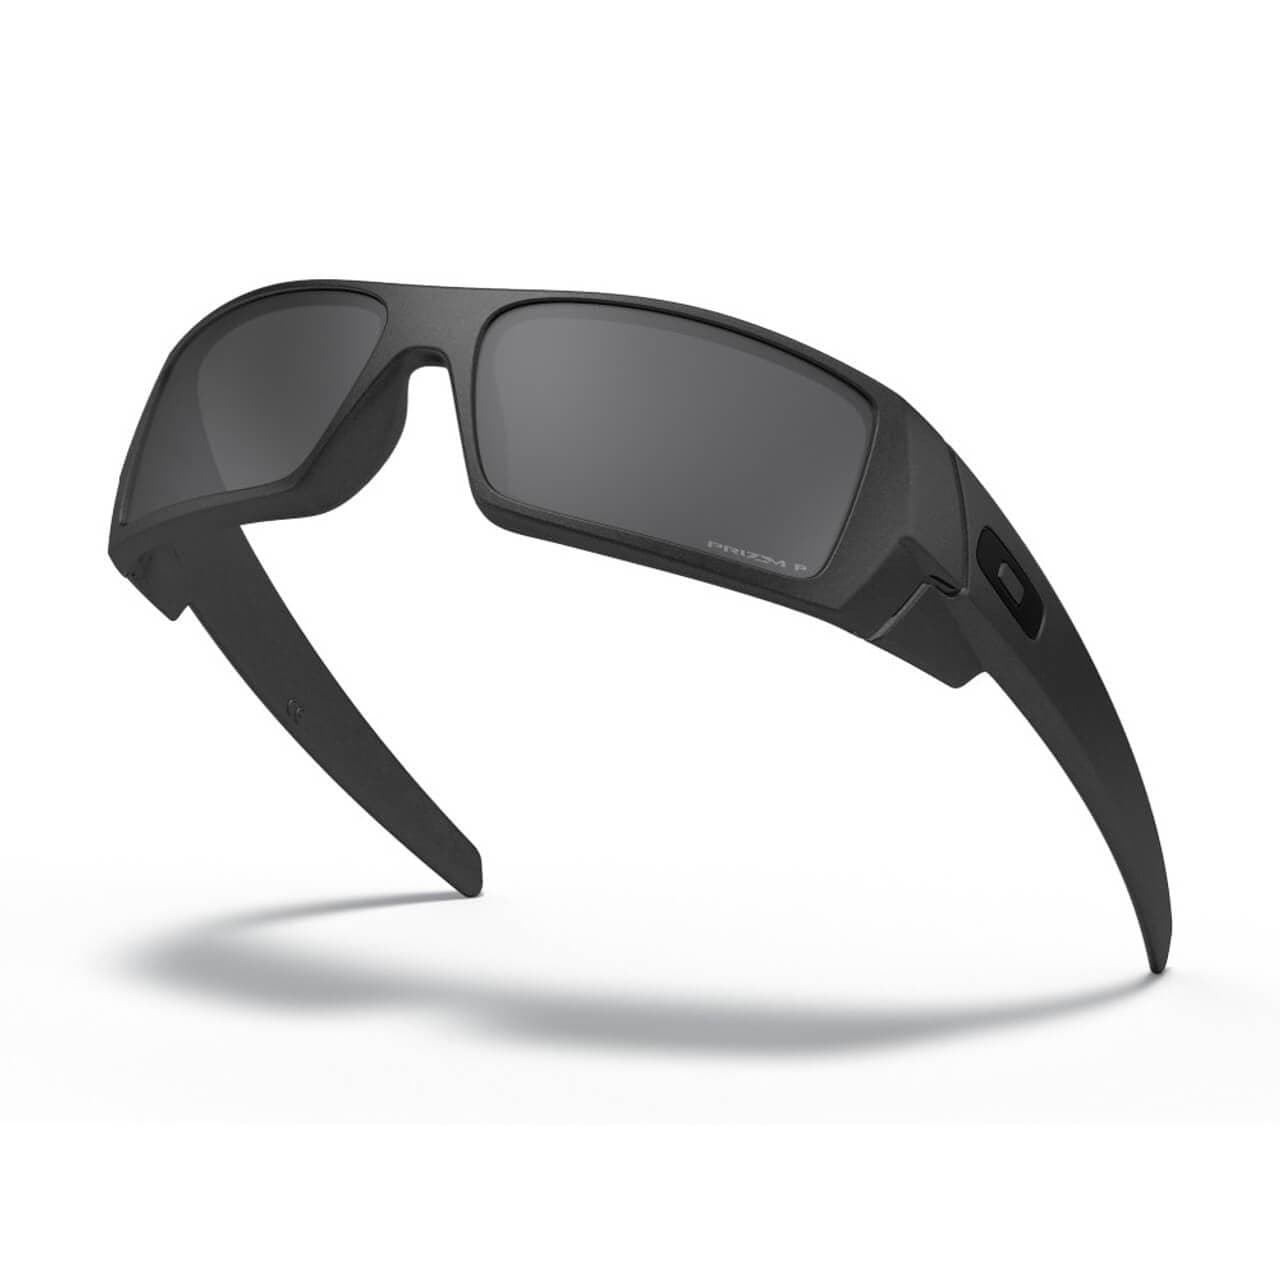 Oakley Gascan Sunglasses OO9014-3560 Steel Frame with Prizm Black Polarized Lens Profile View